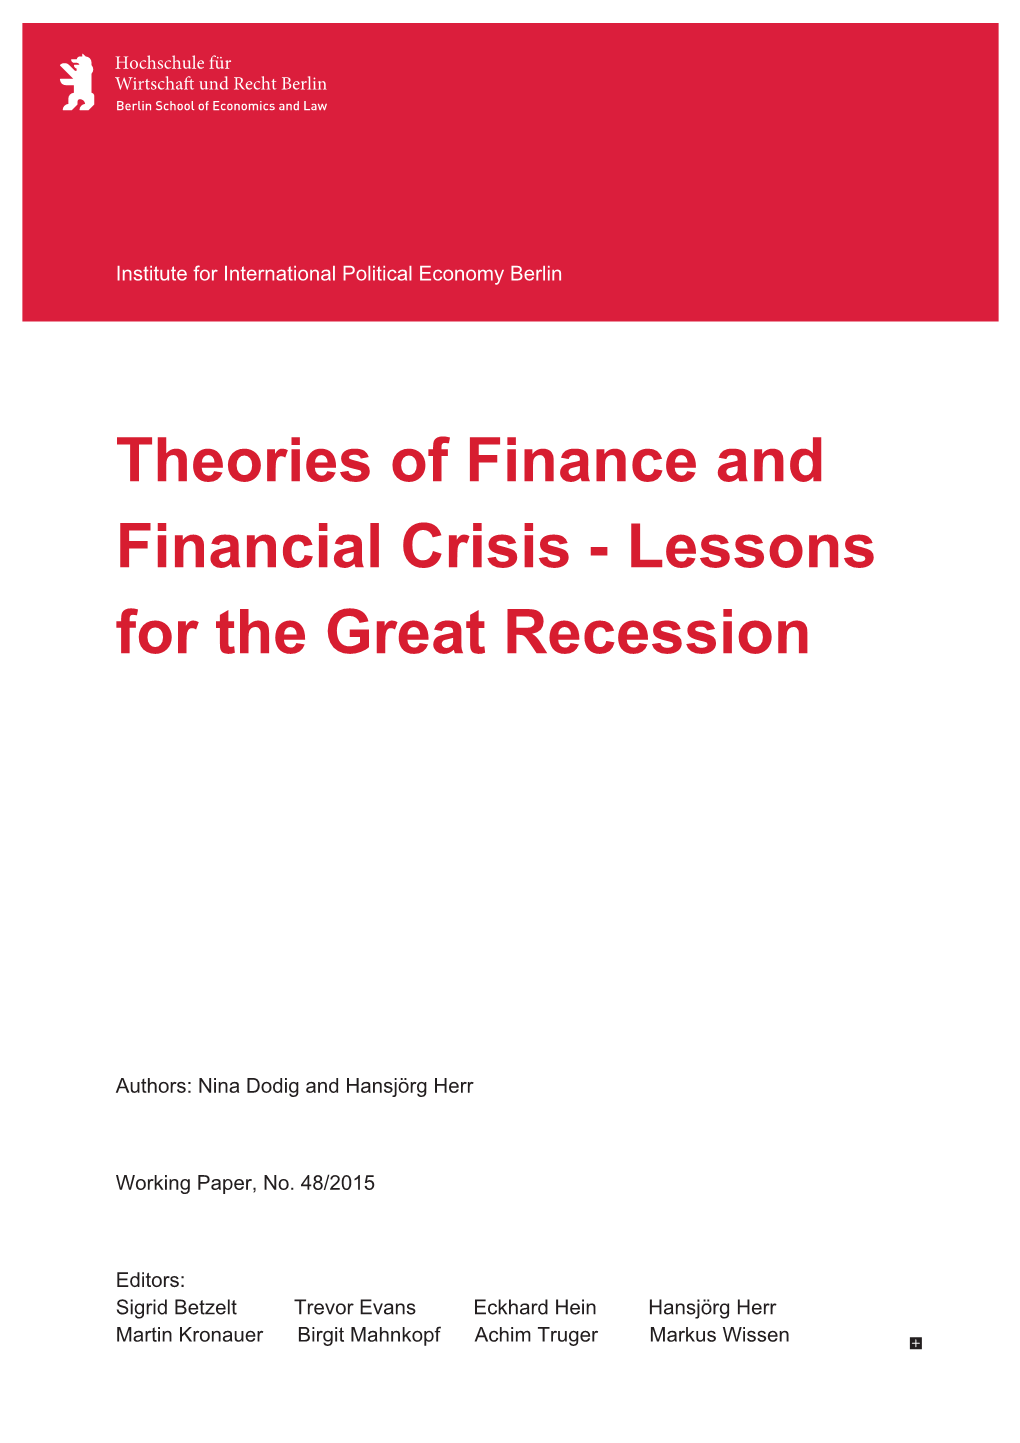 Theories of Finance and Financial Crisis - Lessons for the Great Recession